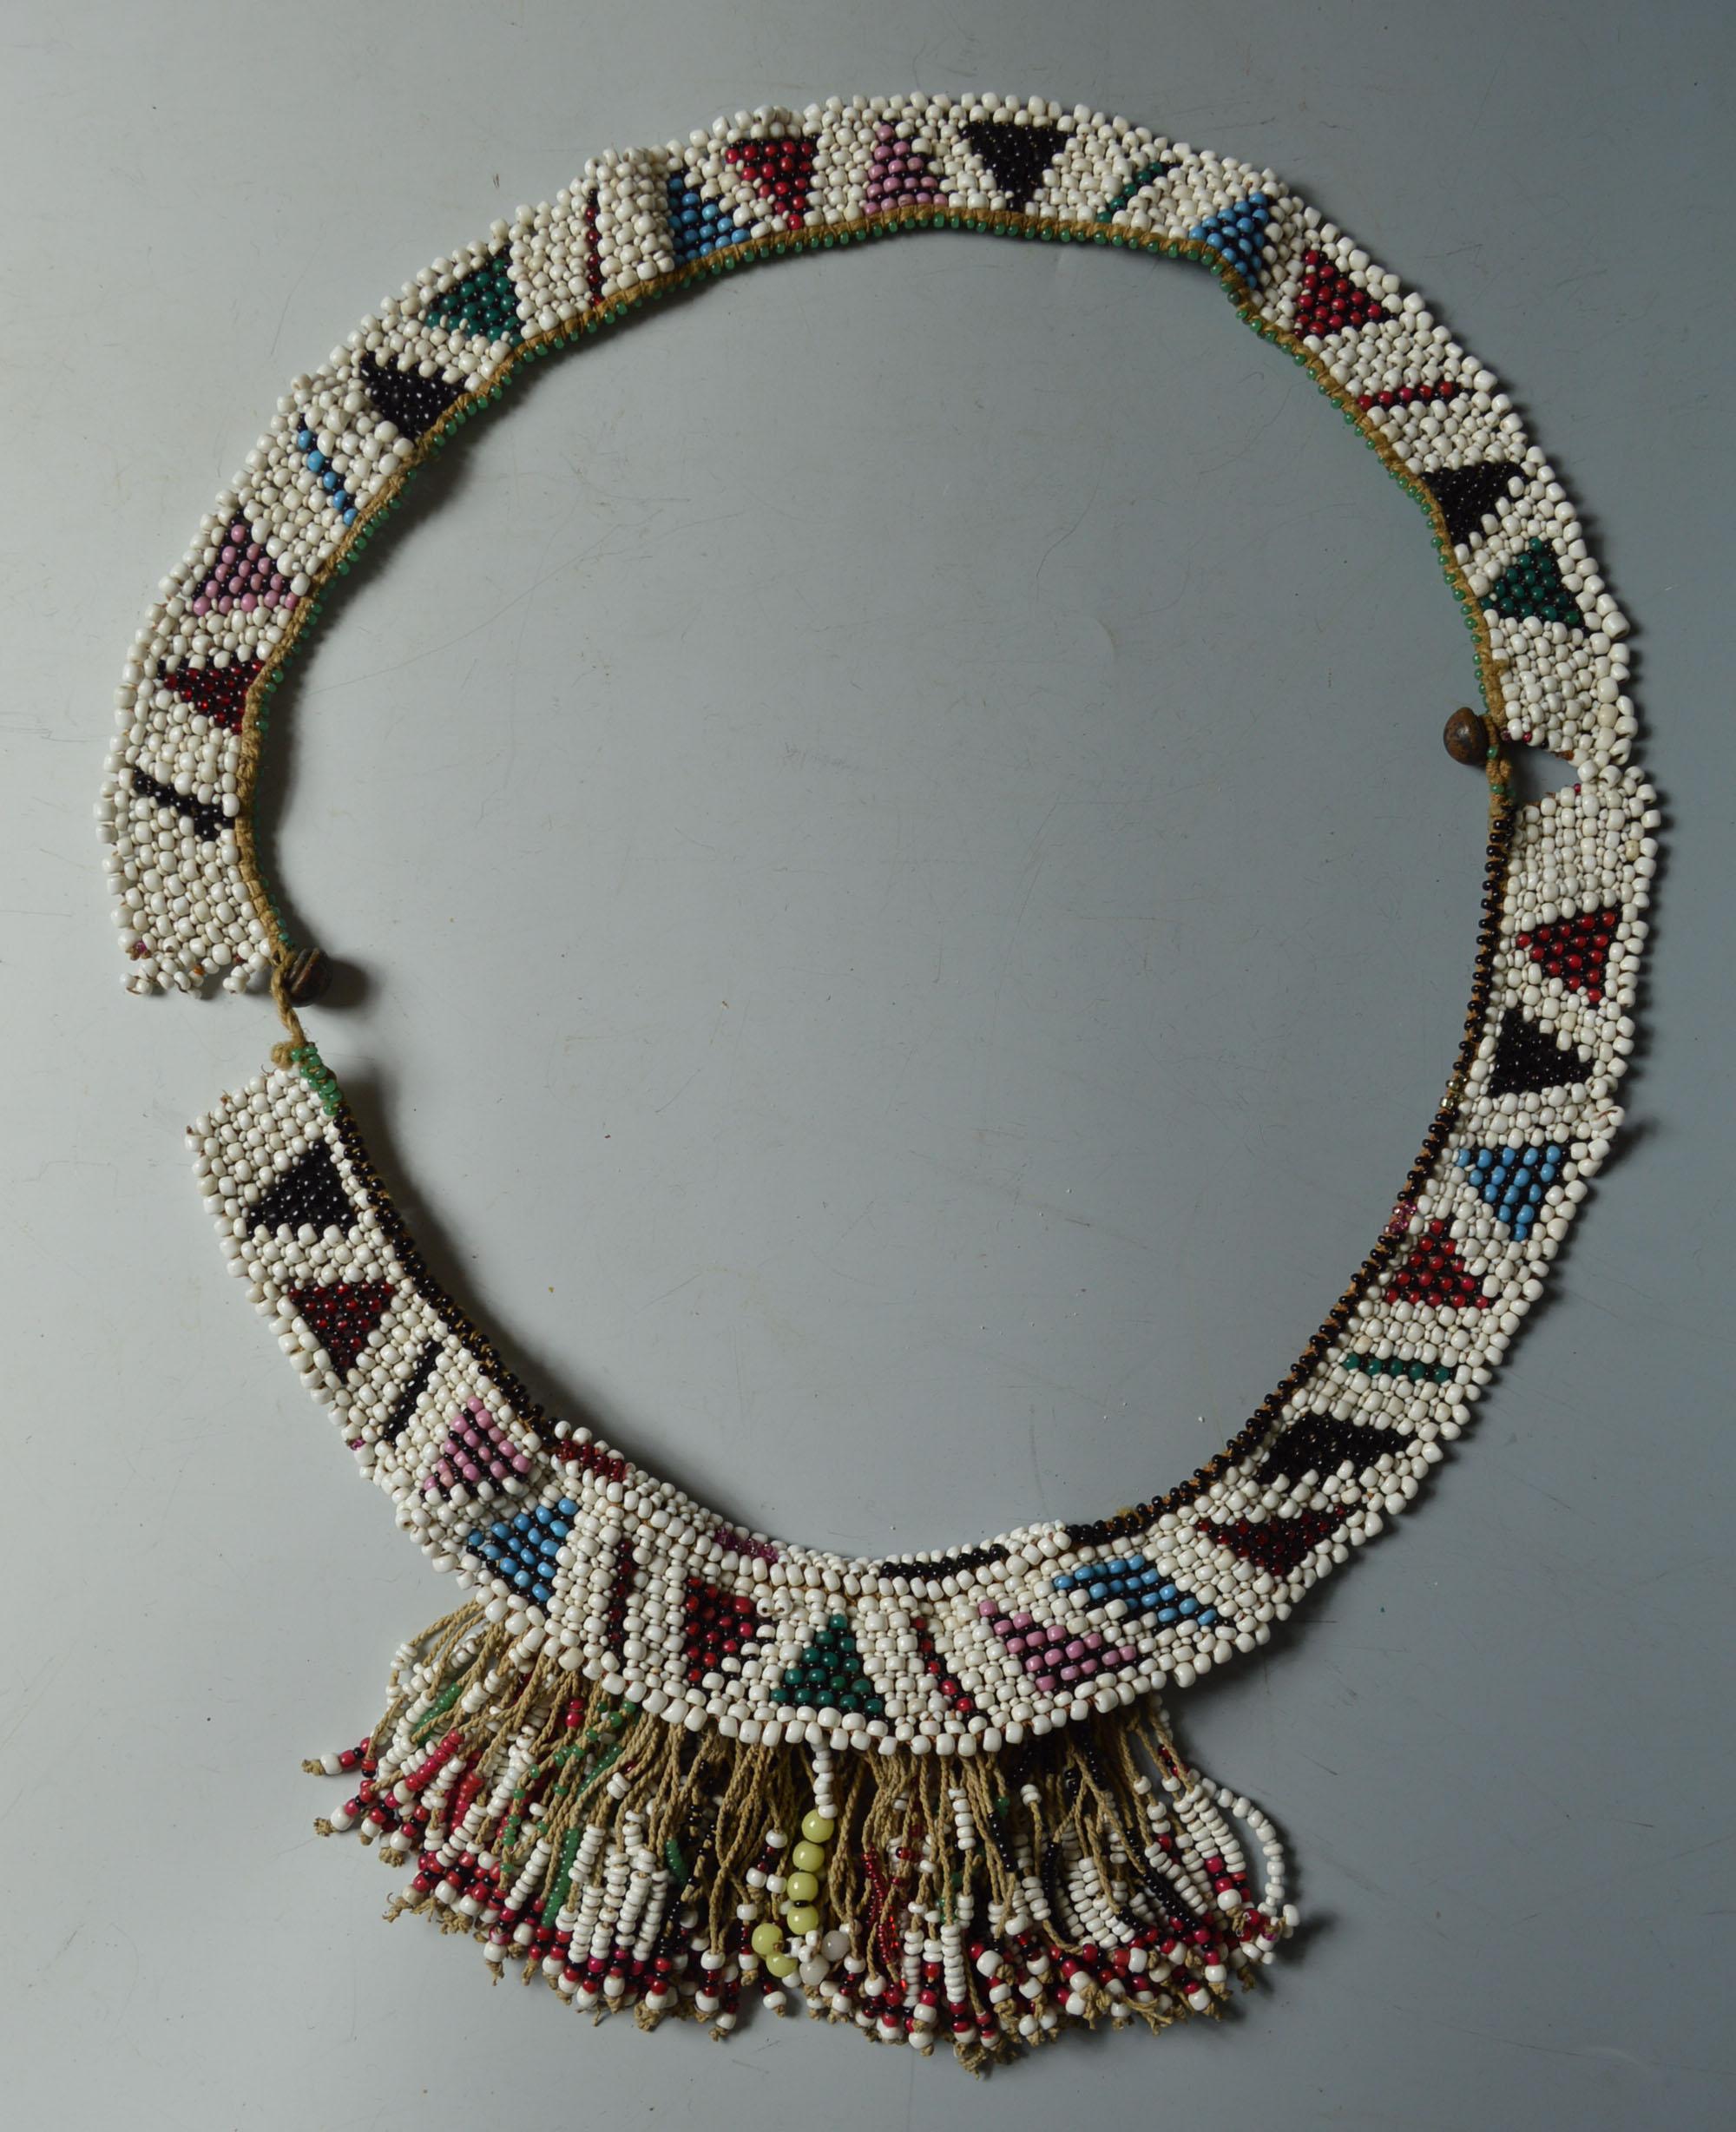 African tribal antique Zulu bead work apron belt South Africa
A fine old Zulu bead work apron belt with central fringed section
the belt in 2 sections with metal buttons glass beads beaded in a triangular pattern
Period early 20th century.

